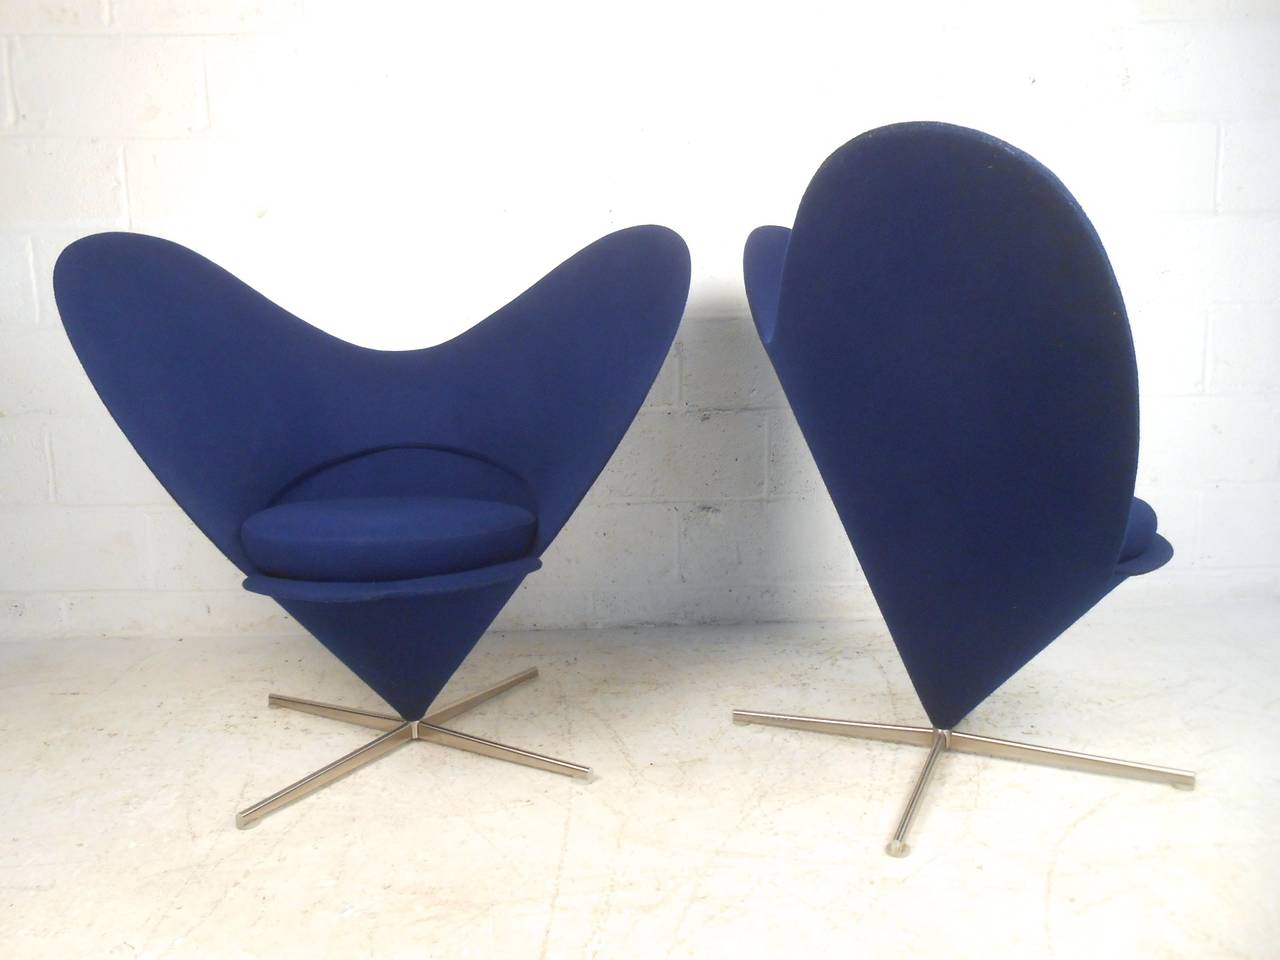 North American Pair of Vintage Swivel Lounge Chairs